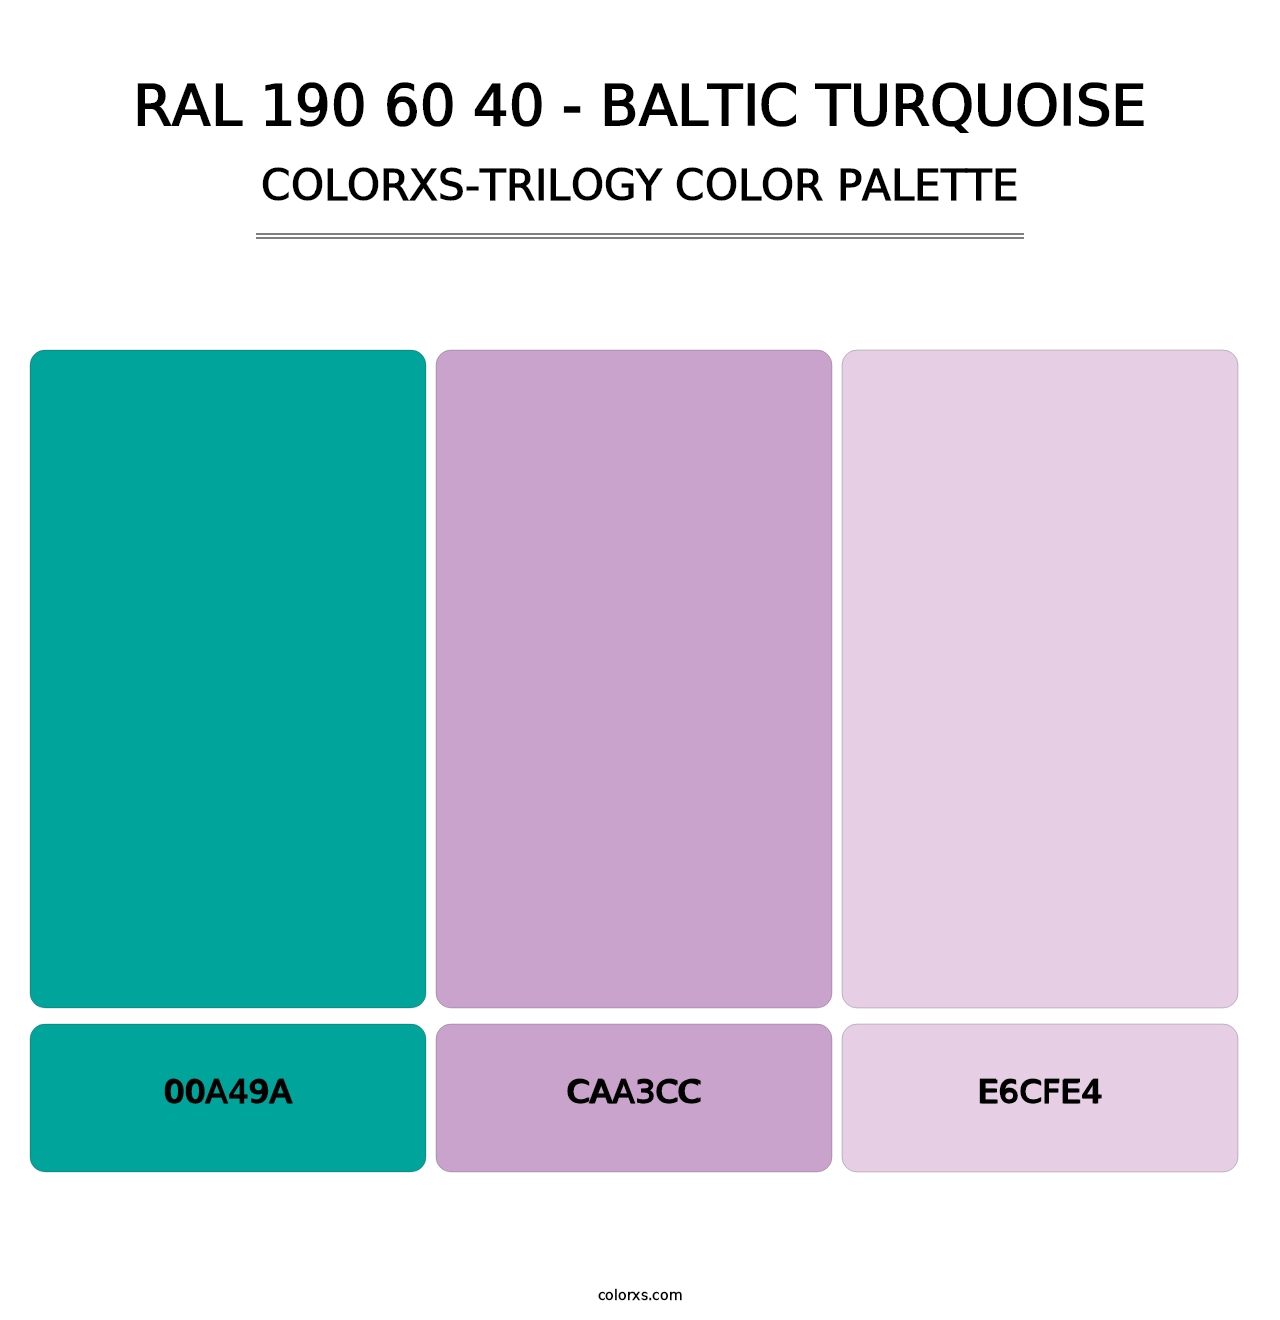 RAL 190 60 40 - Baltic Turquoise - Colorxs Trilogy Palette